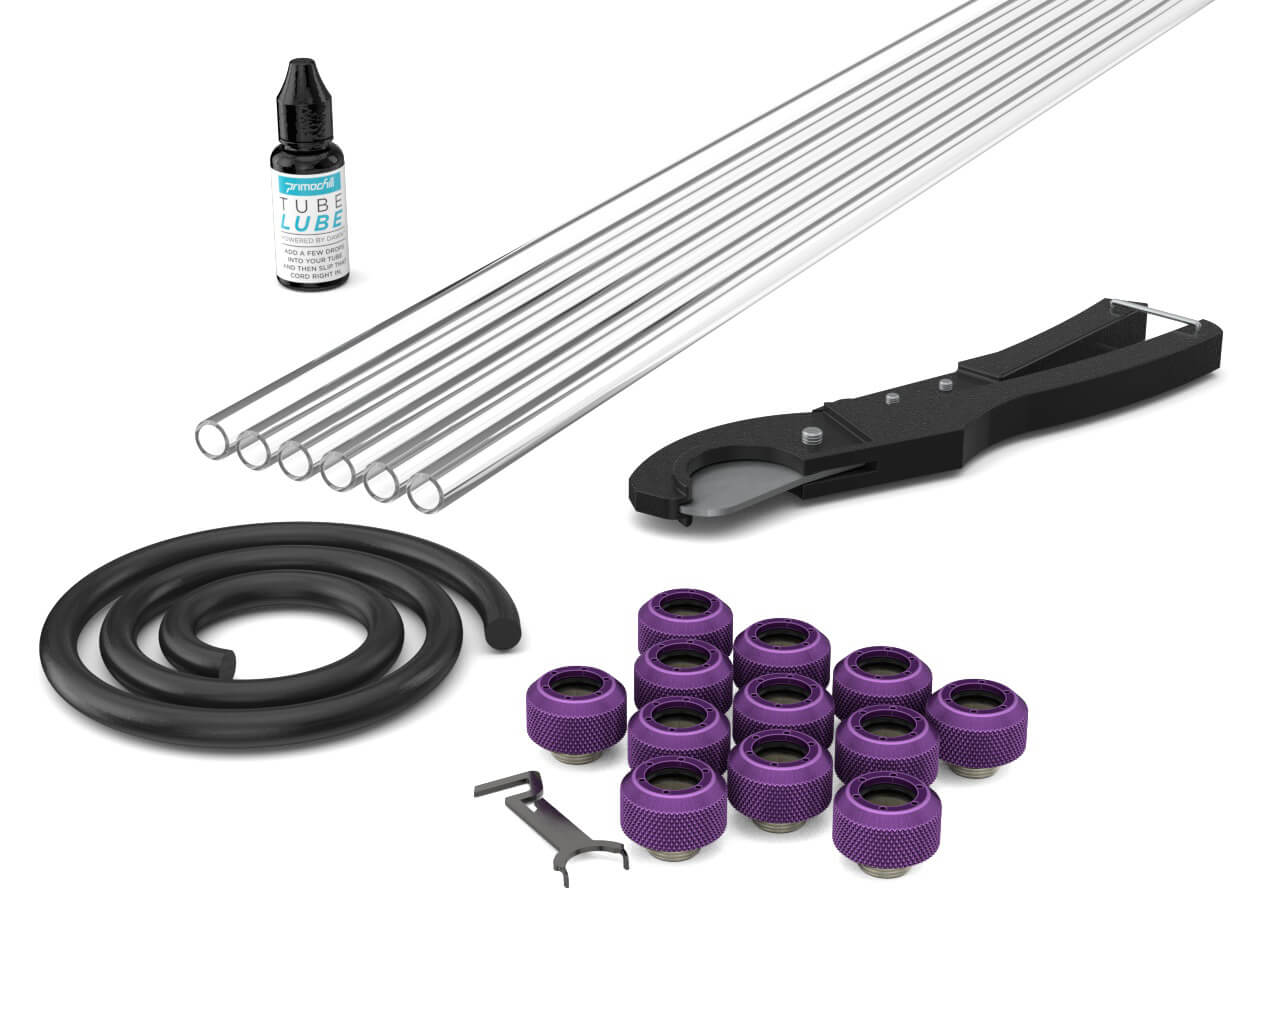 PrimoChill Professional 1/2 Inch PETG / RSX Combo Pack - PrimoChill - KEEPING IT COOL Candy Purple